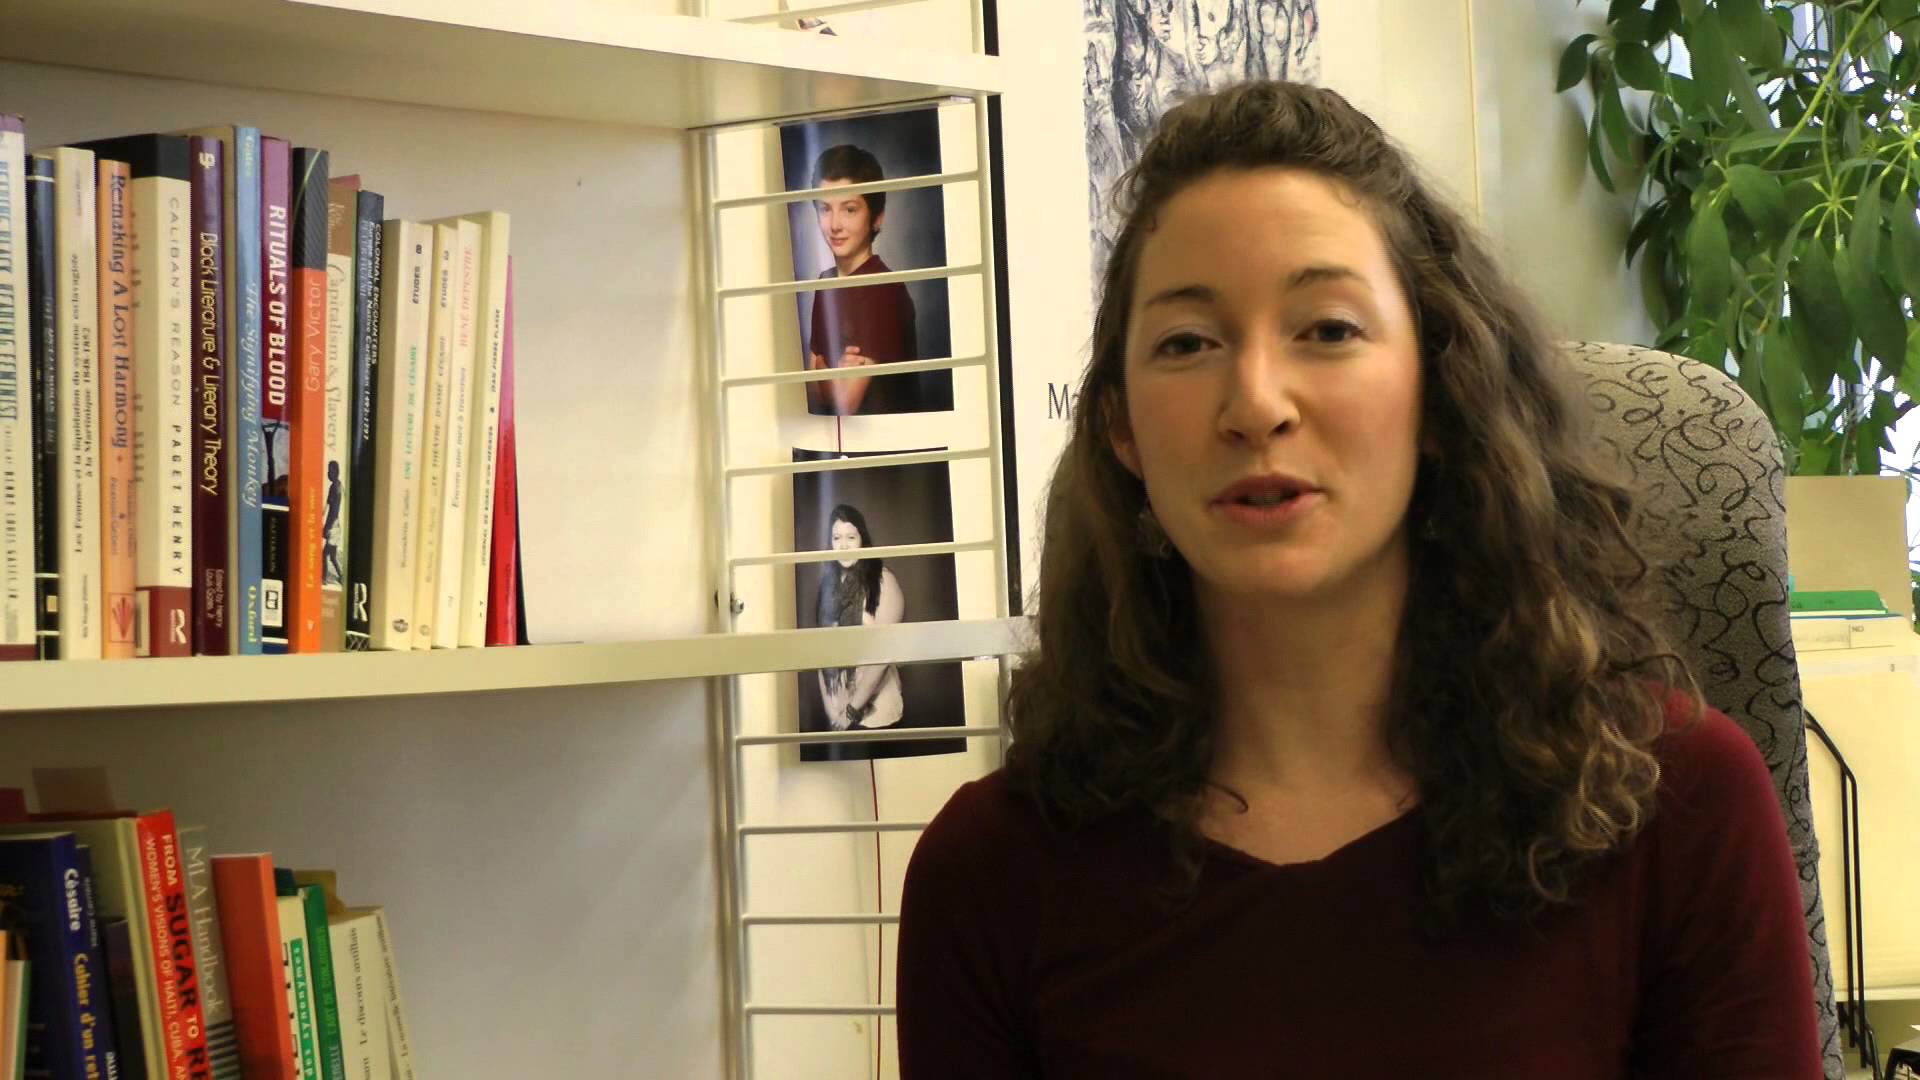 Thumbnail for: Alumna/Instructor on Why She Chose the MA in French at Carleton